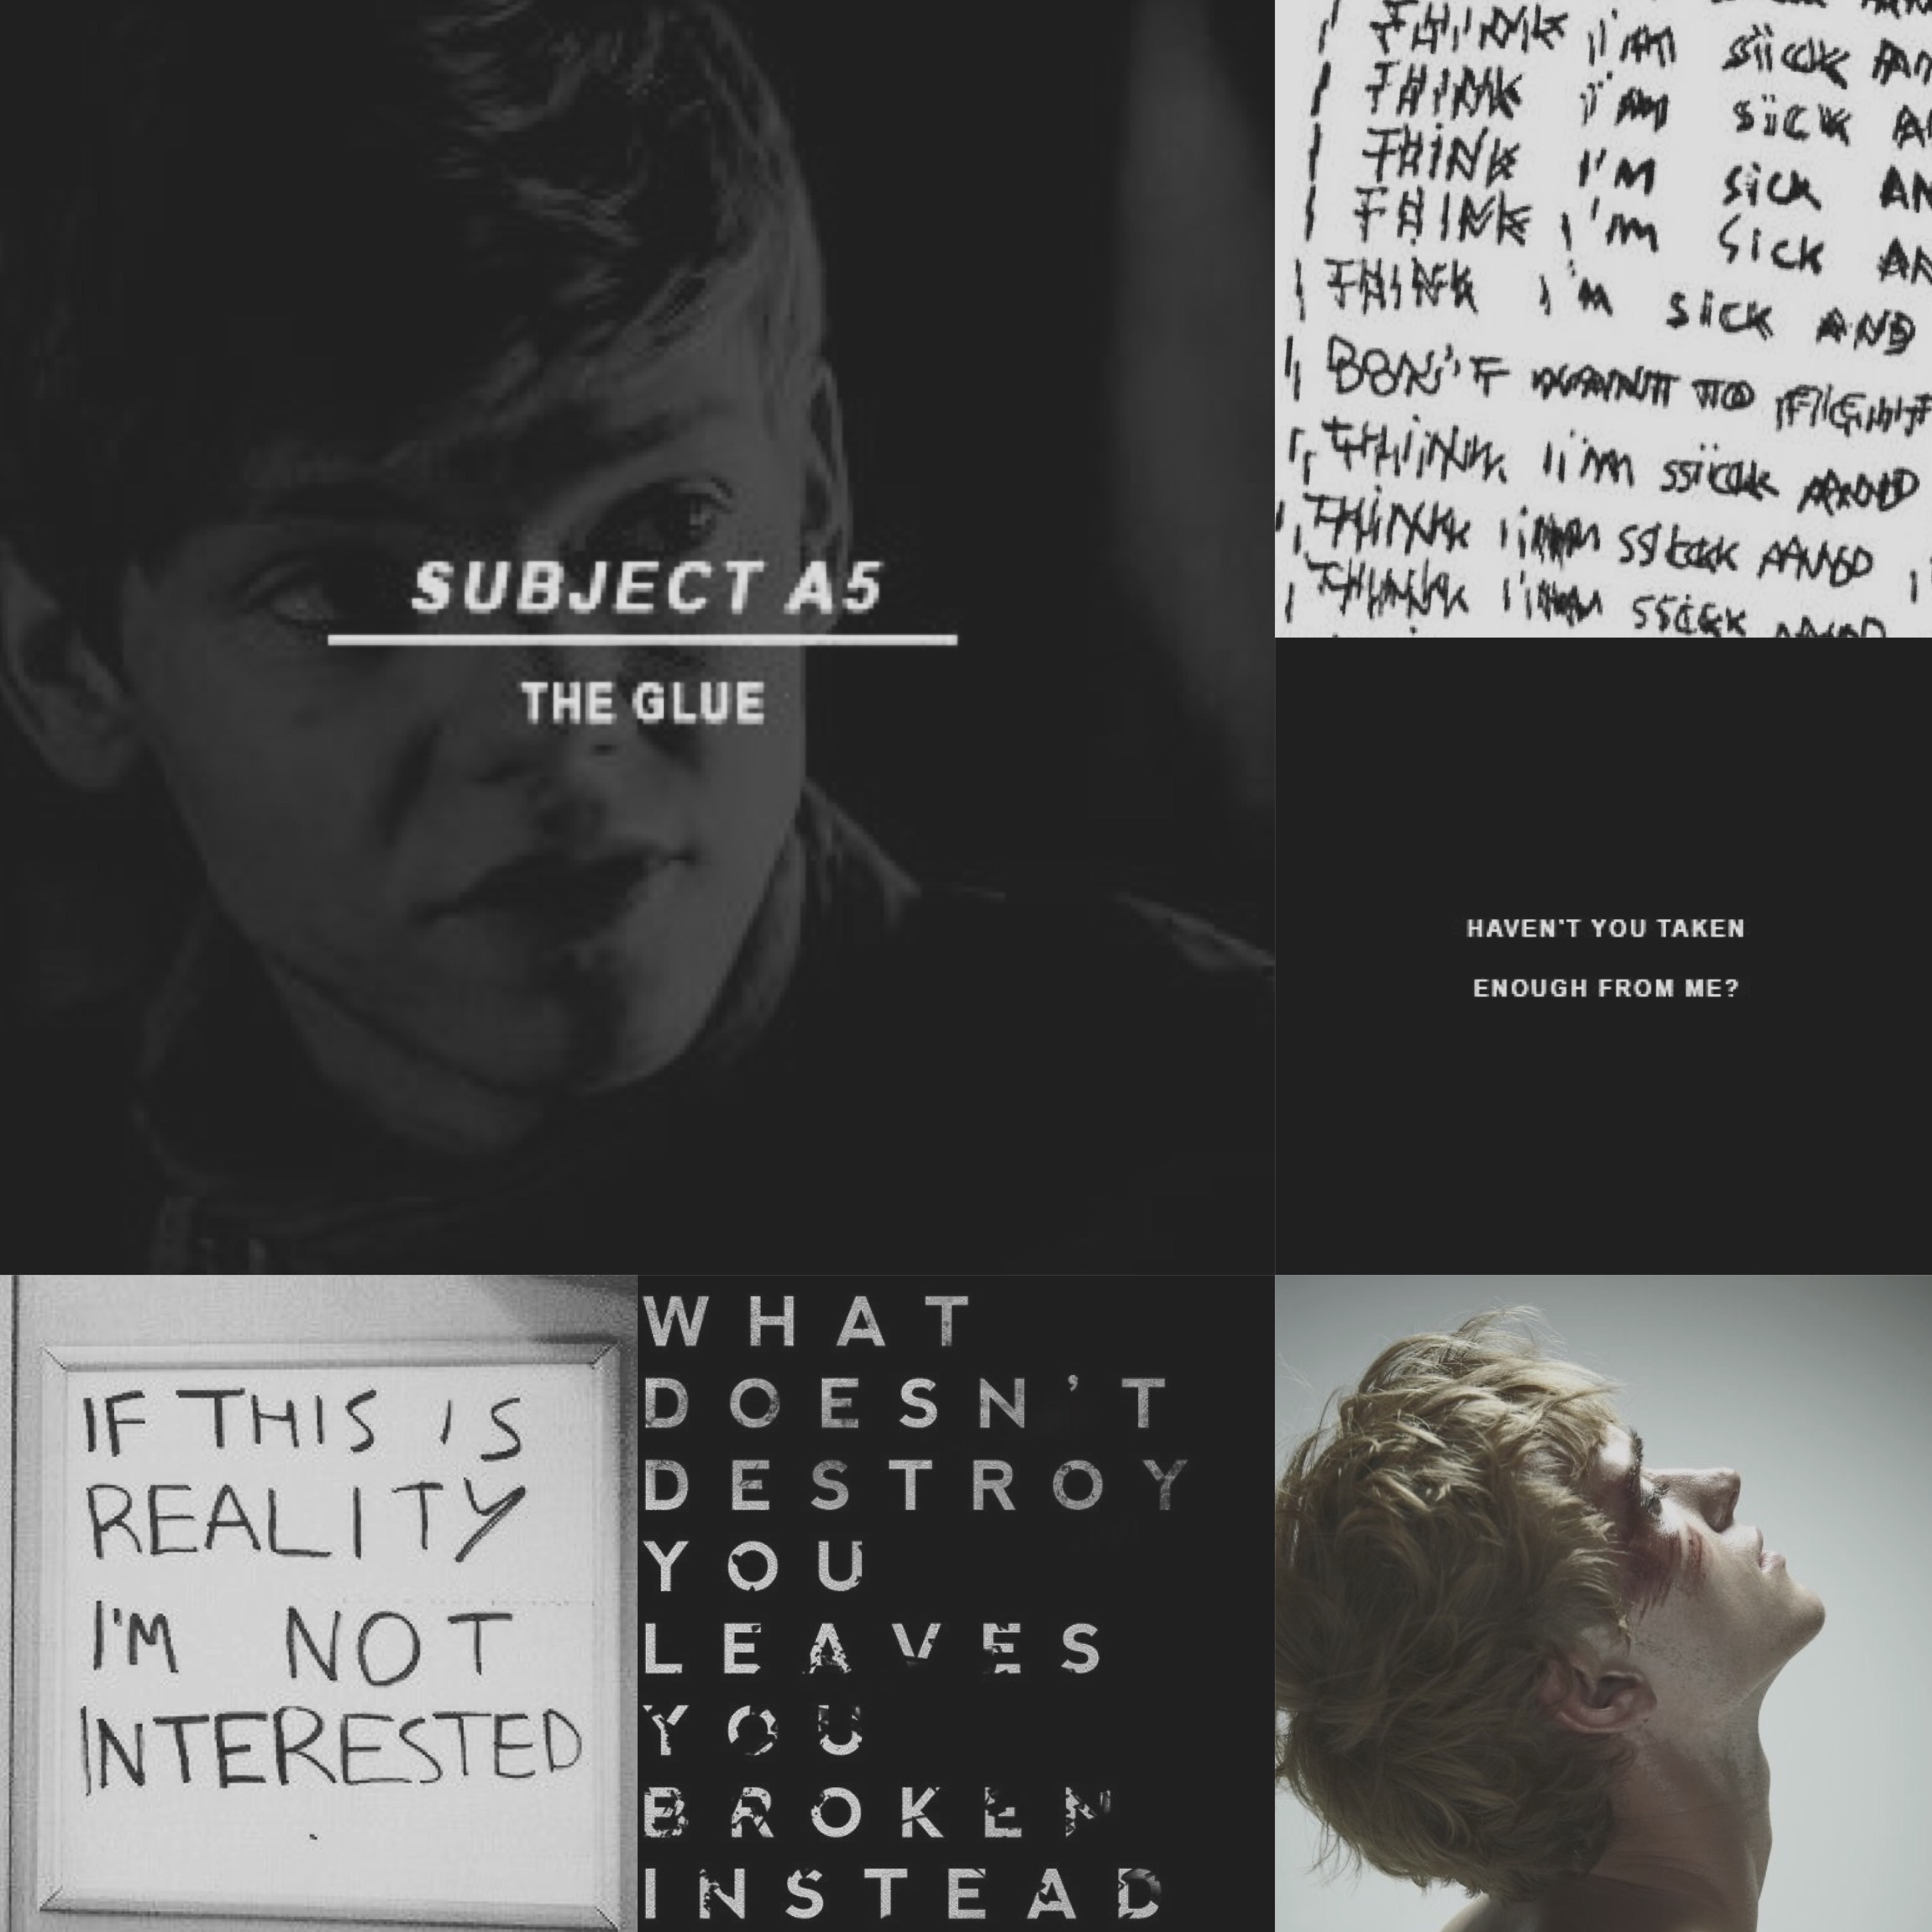 the death cure page 250